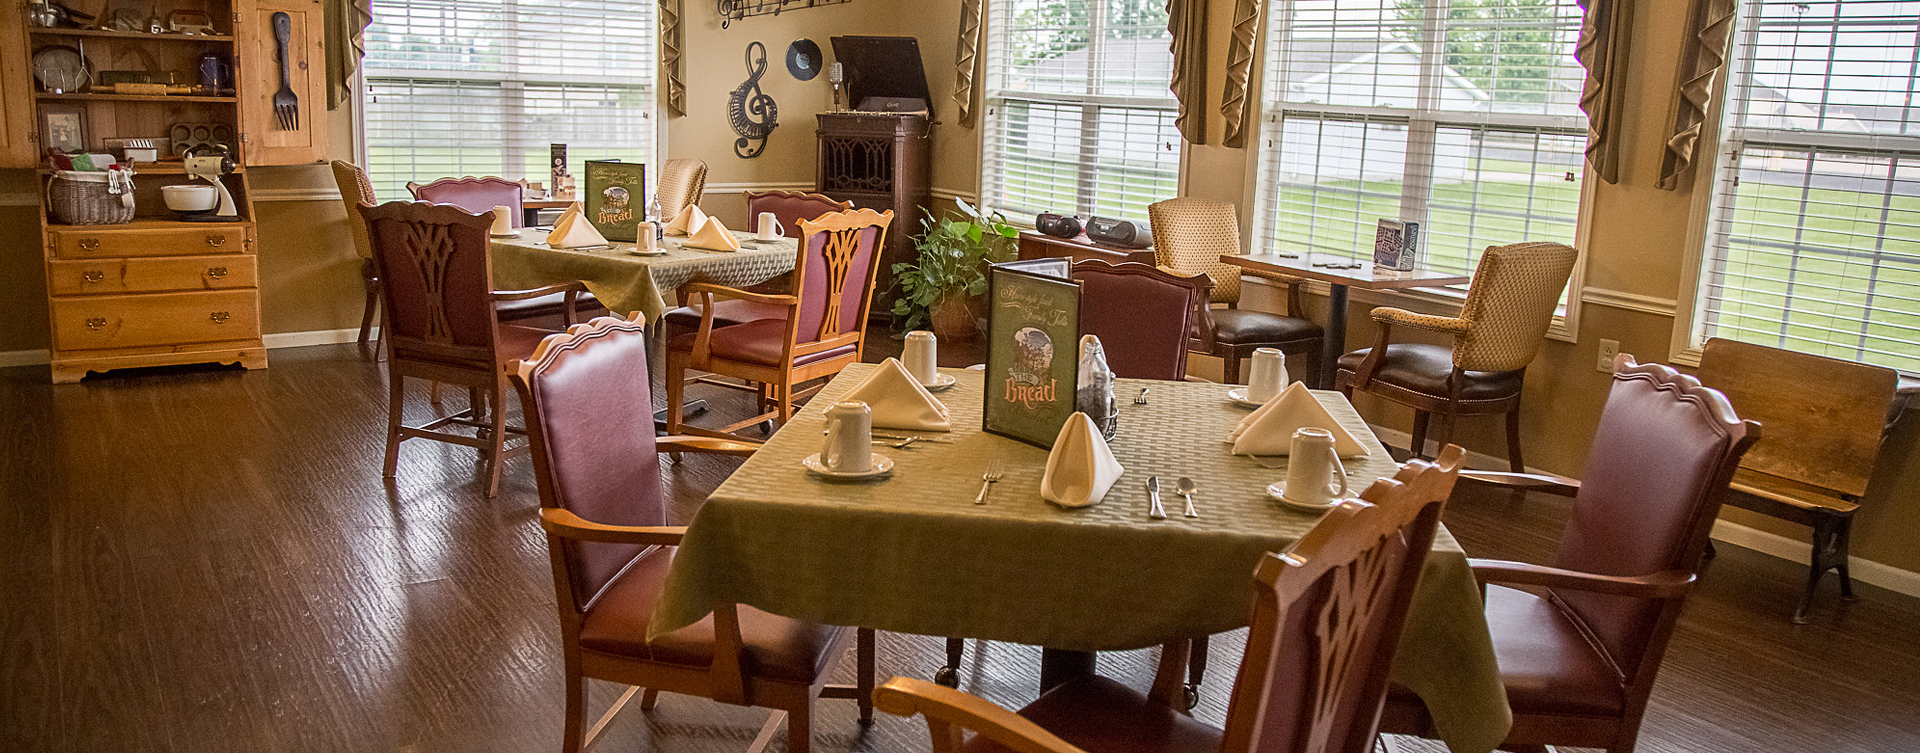 Mary B’s country kitchen evokes a sense of home and reconnects residents to past life skills at Bickford of Muscatine